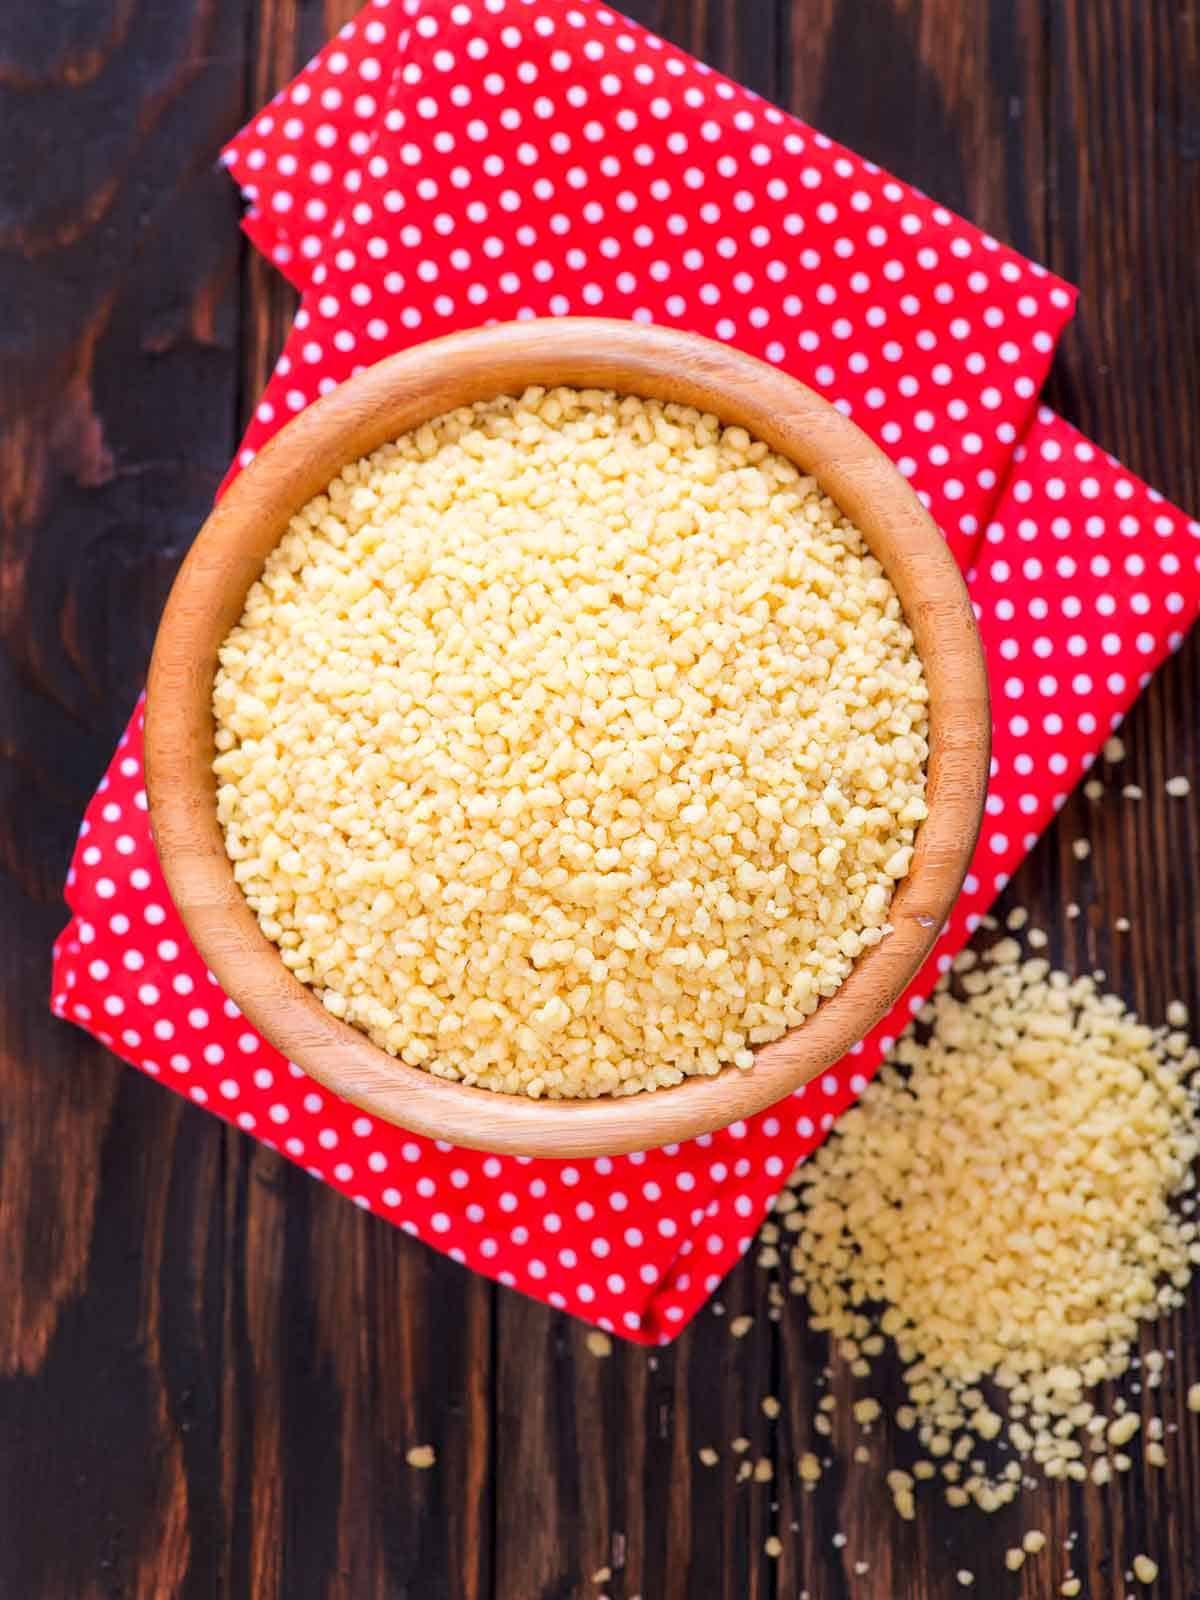 what is couscous - types, benefits, culinary uses